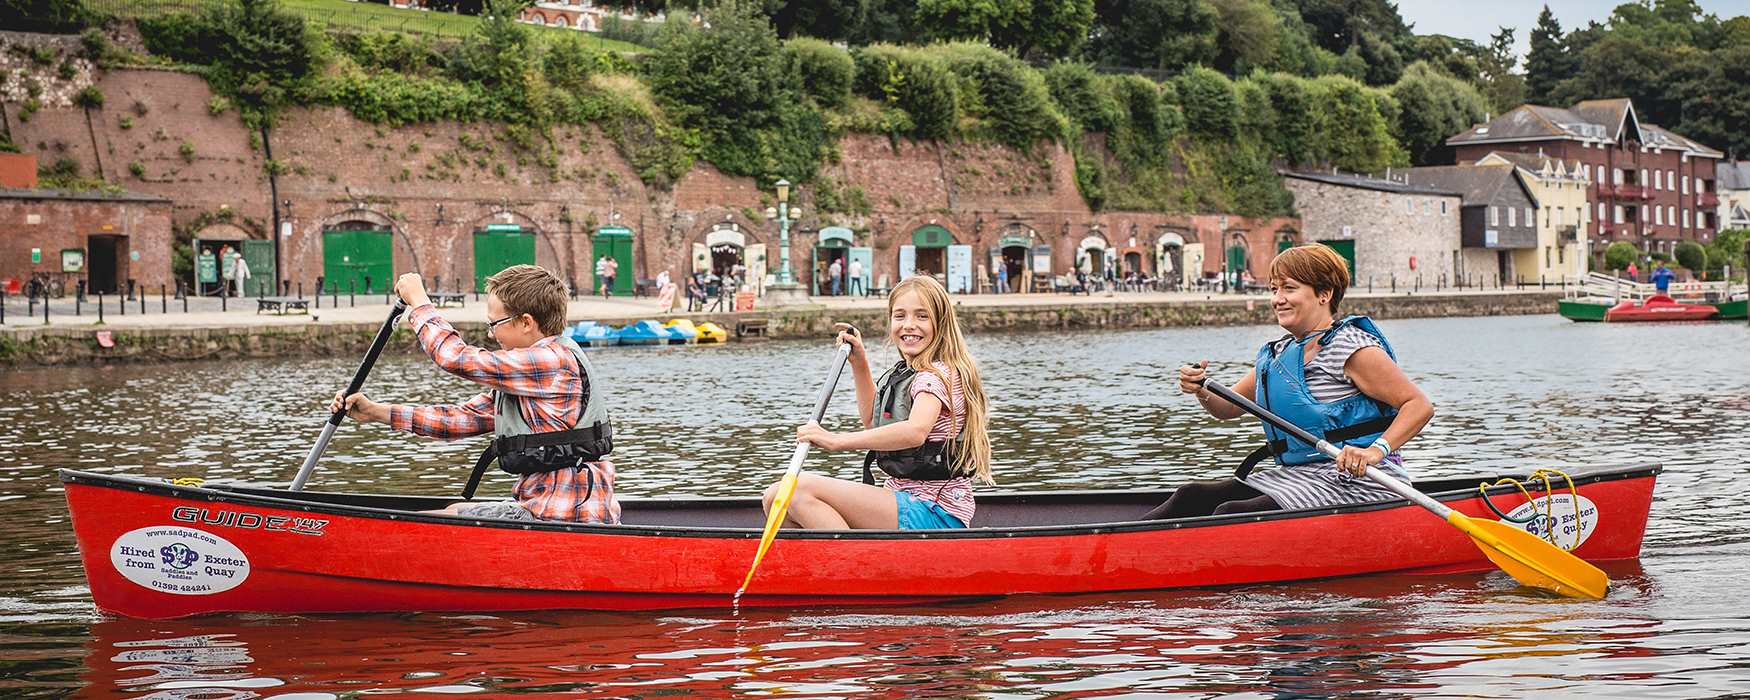 Kayaking on Exeter's quay